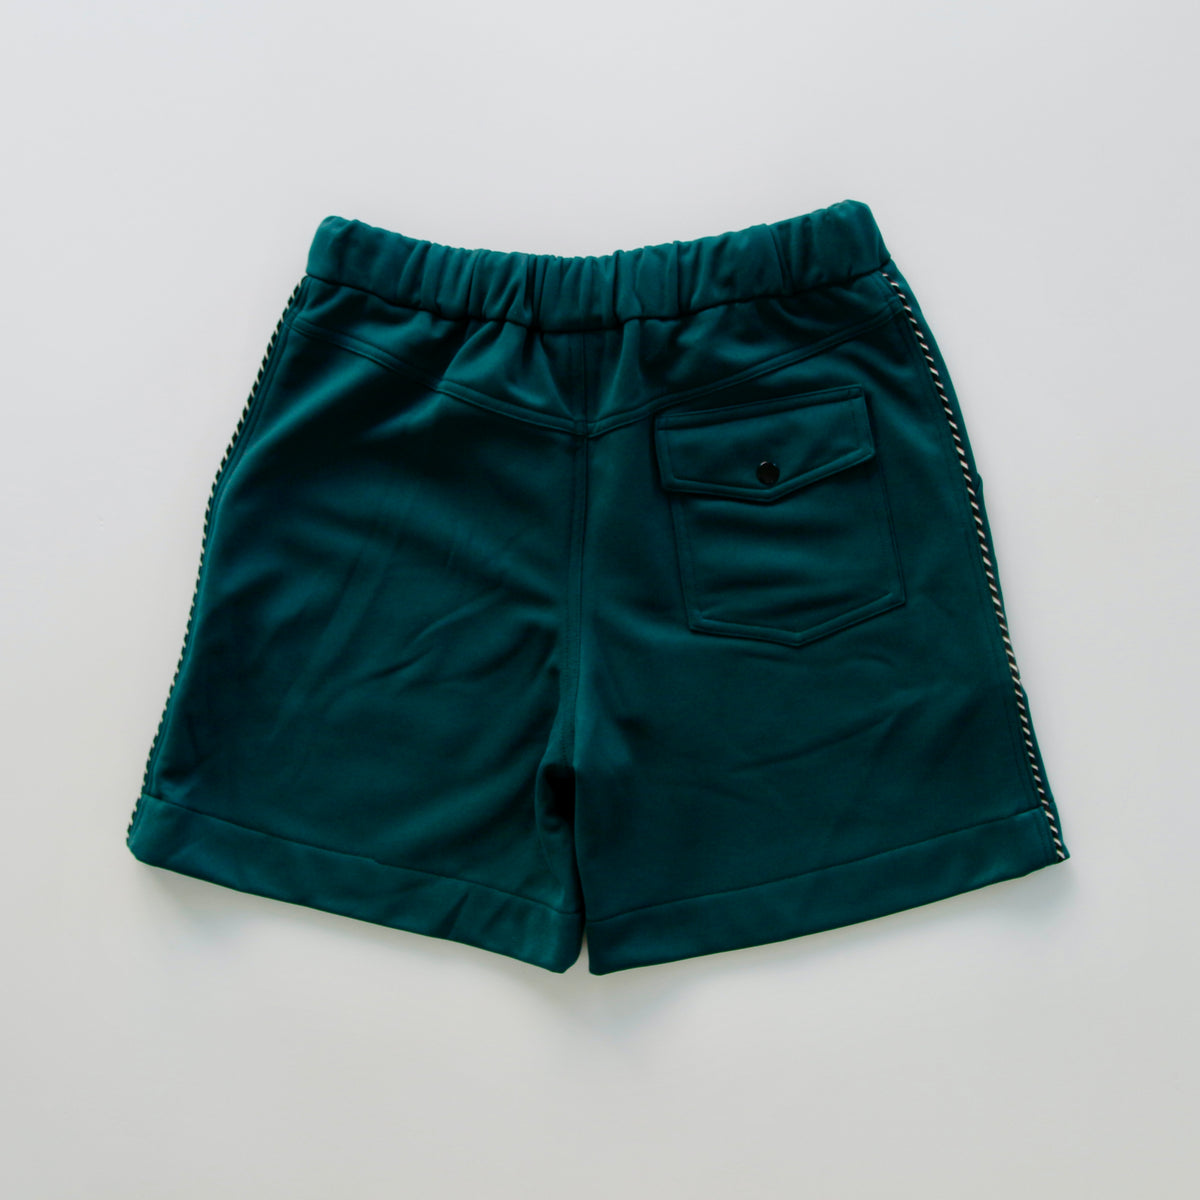 For The Homies Camp Shorts - Green